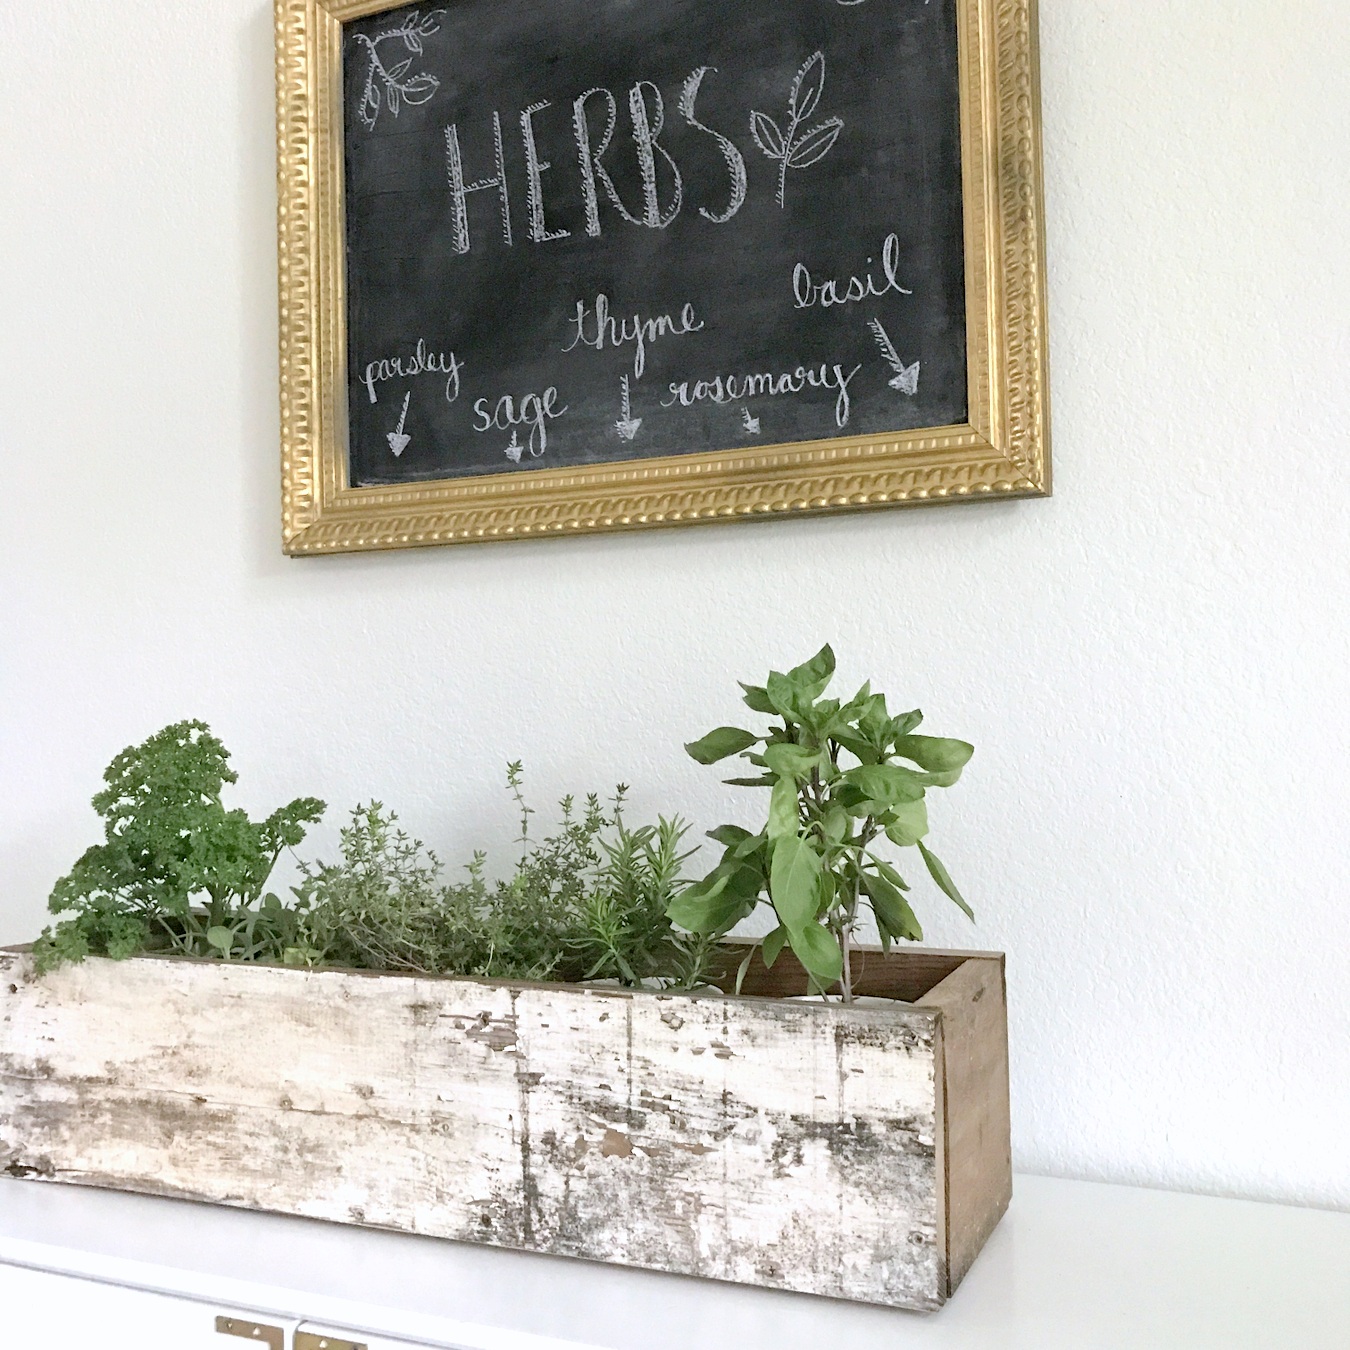 Help your garden transition from summer to fall with this DIY herb planter box